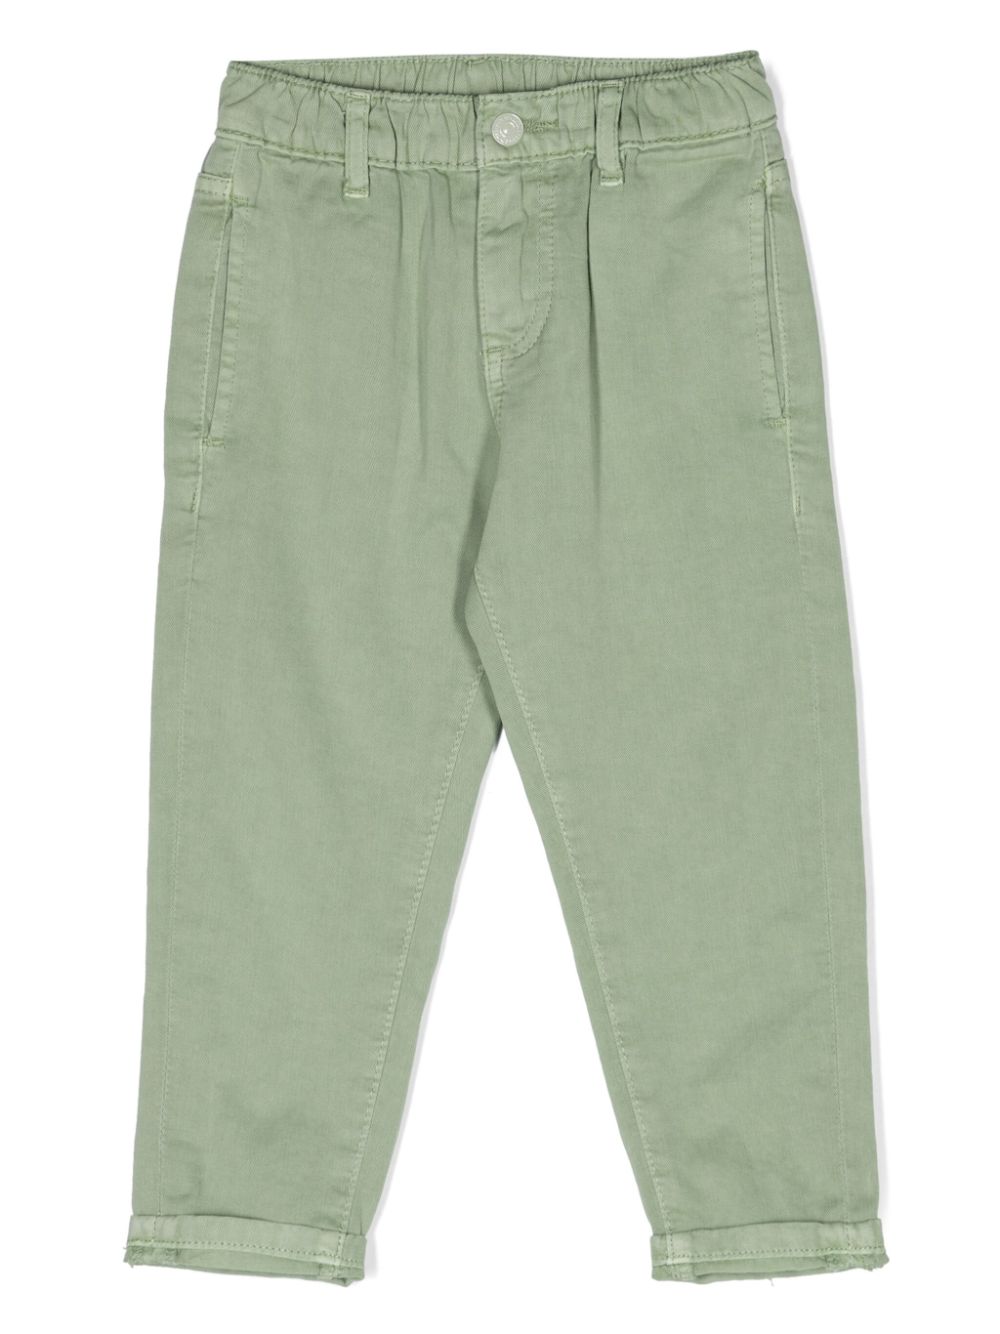 guess kids mid-rise skinny jeans - Verde